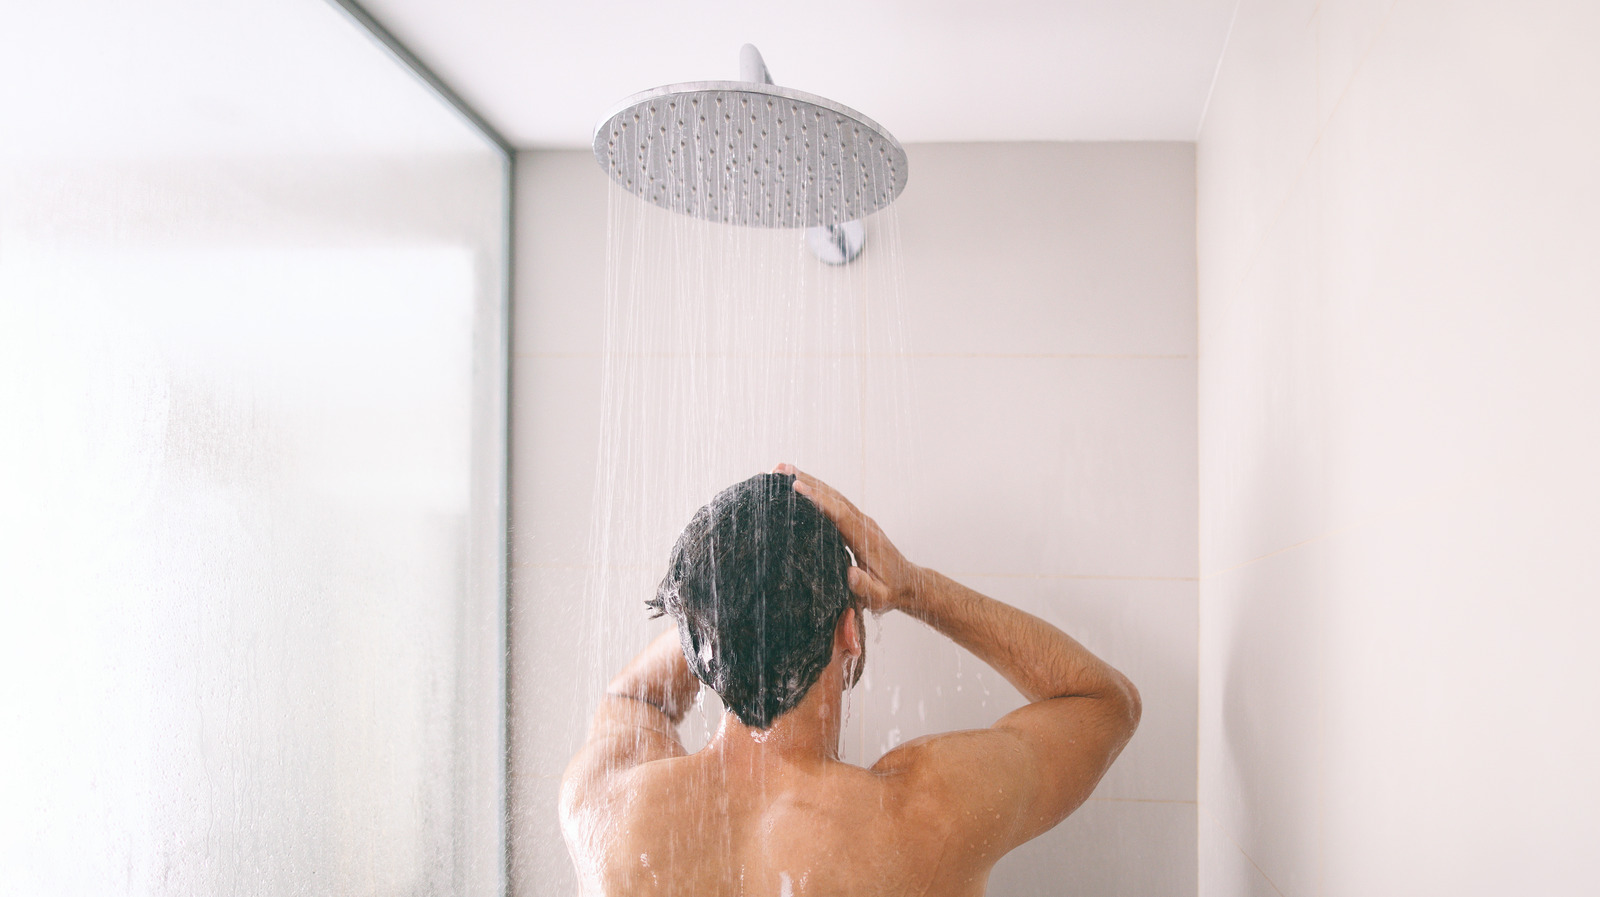 Cock sprayed with shower head image